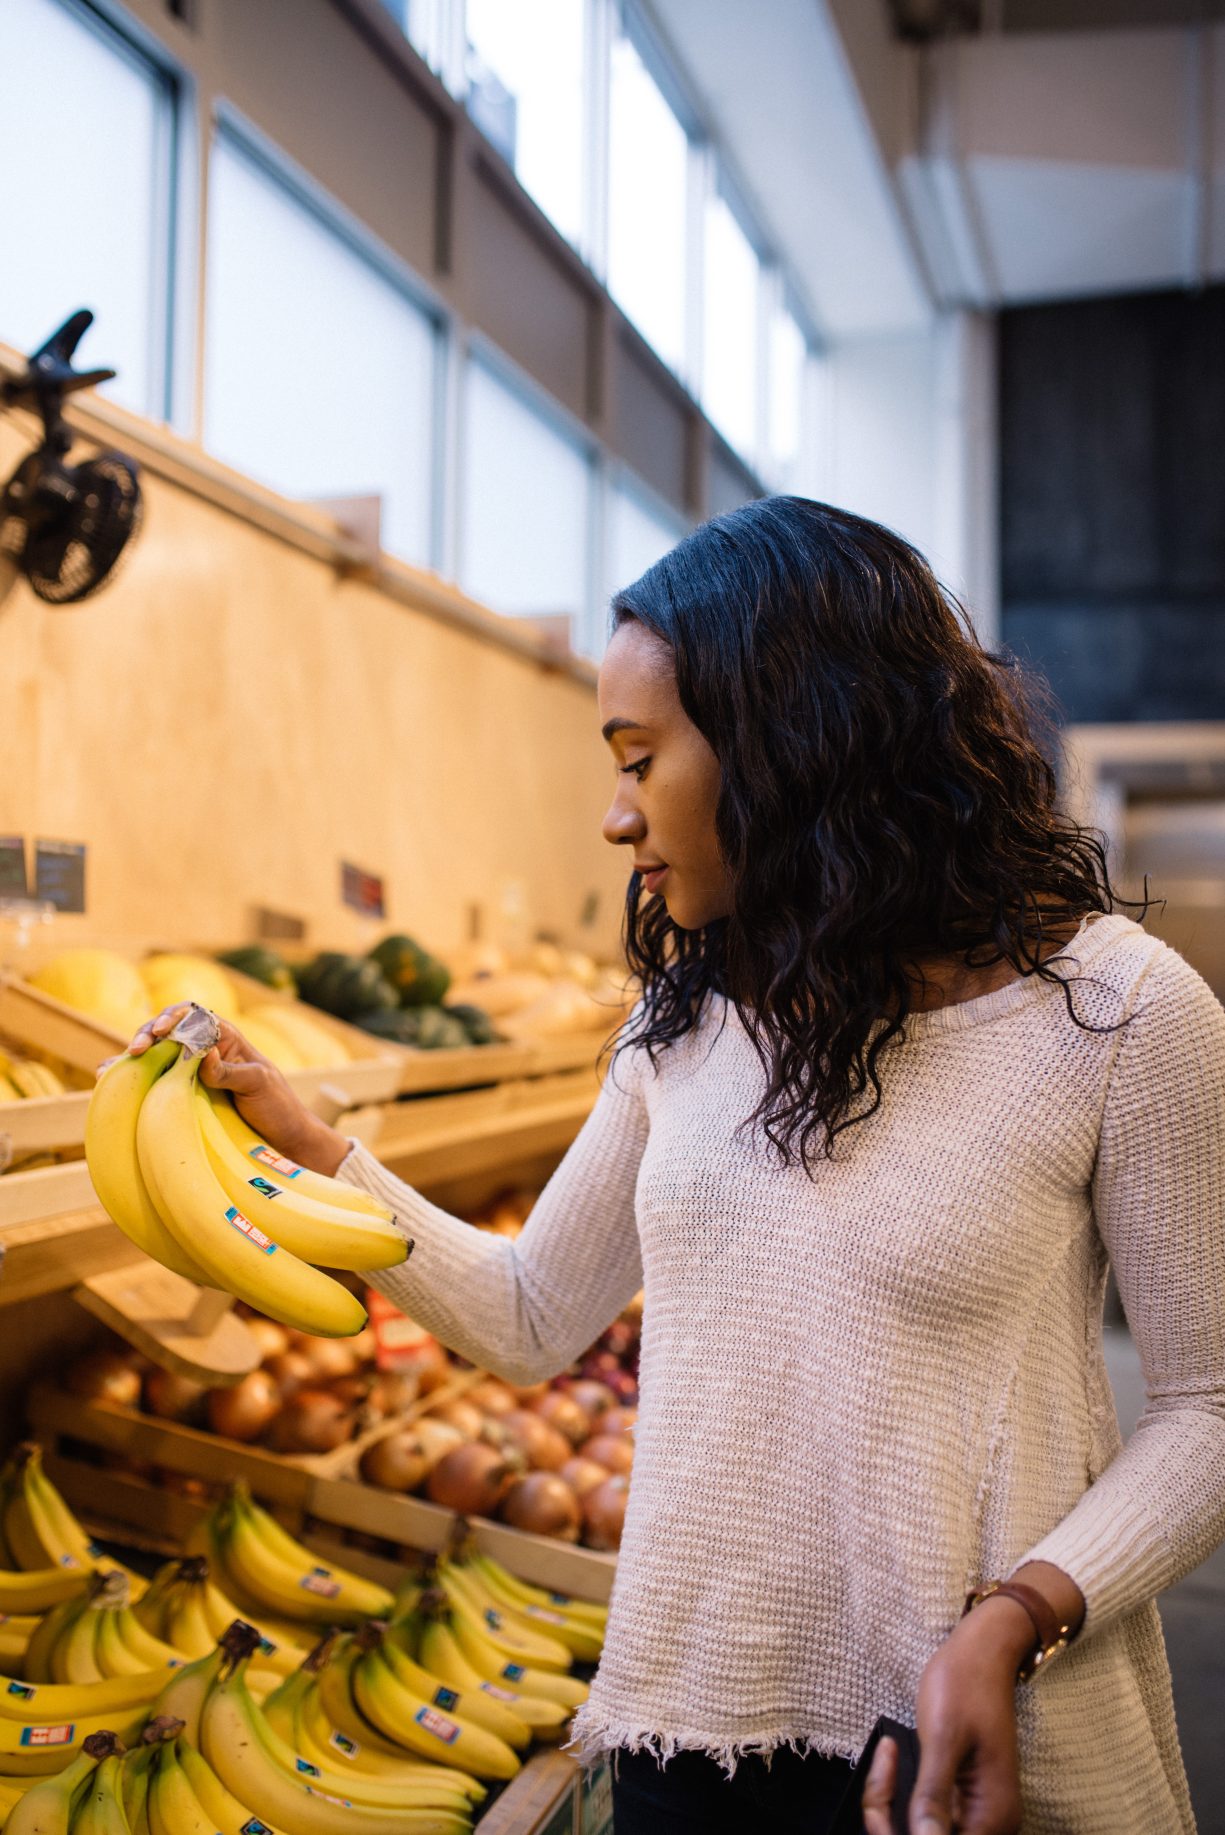 Young woman in grocery store examines a bunch of ripe bananas.